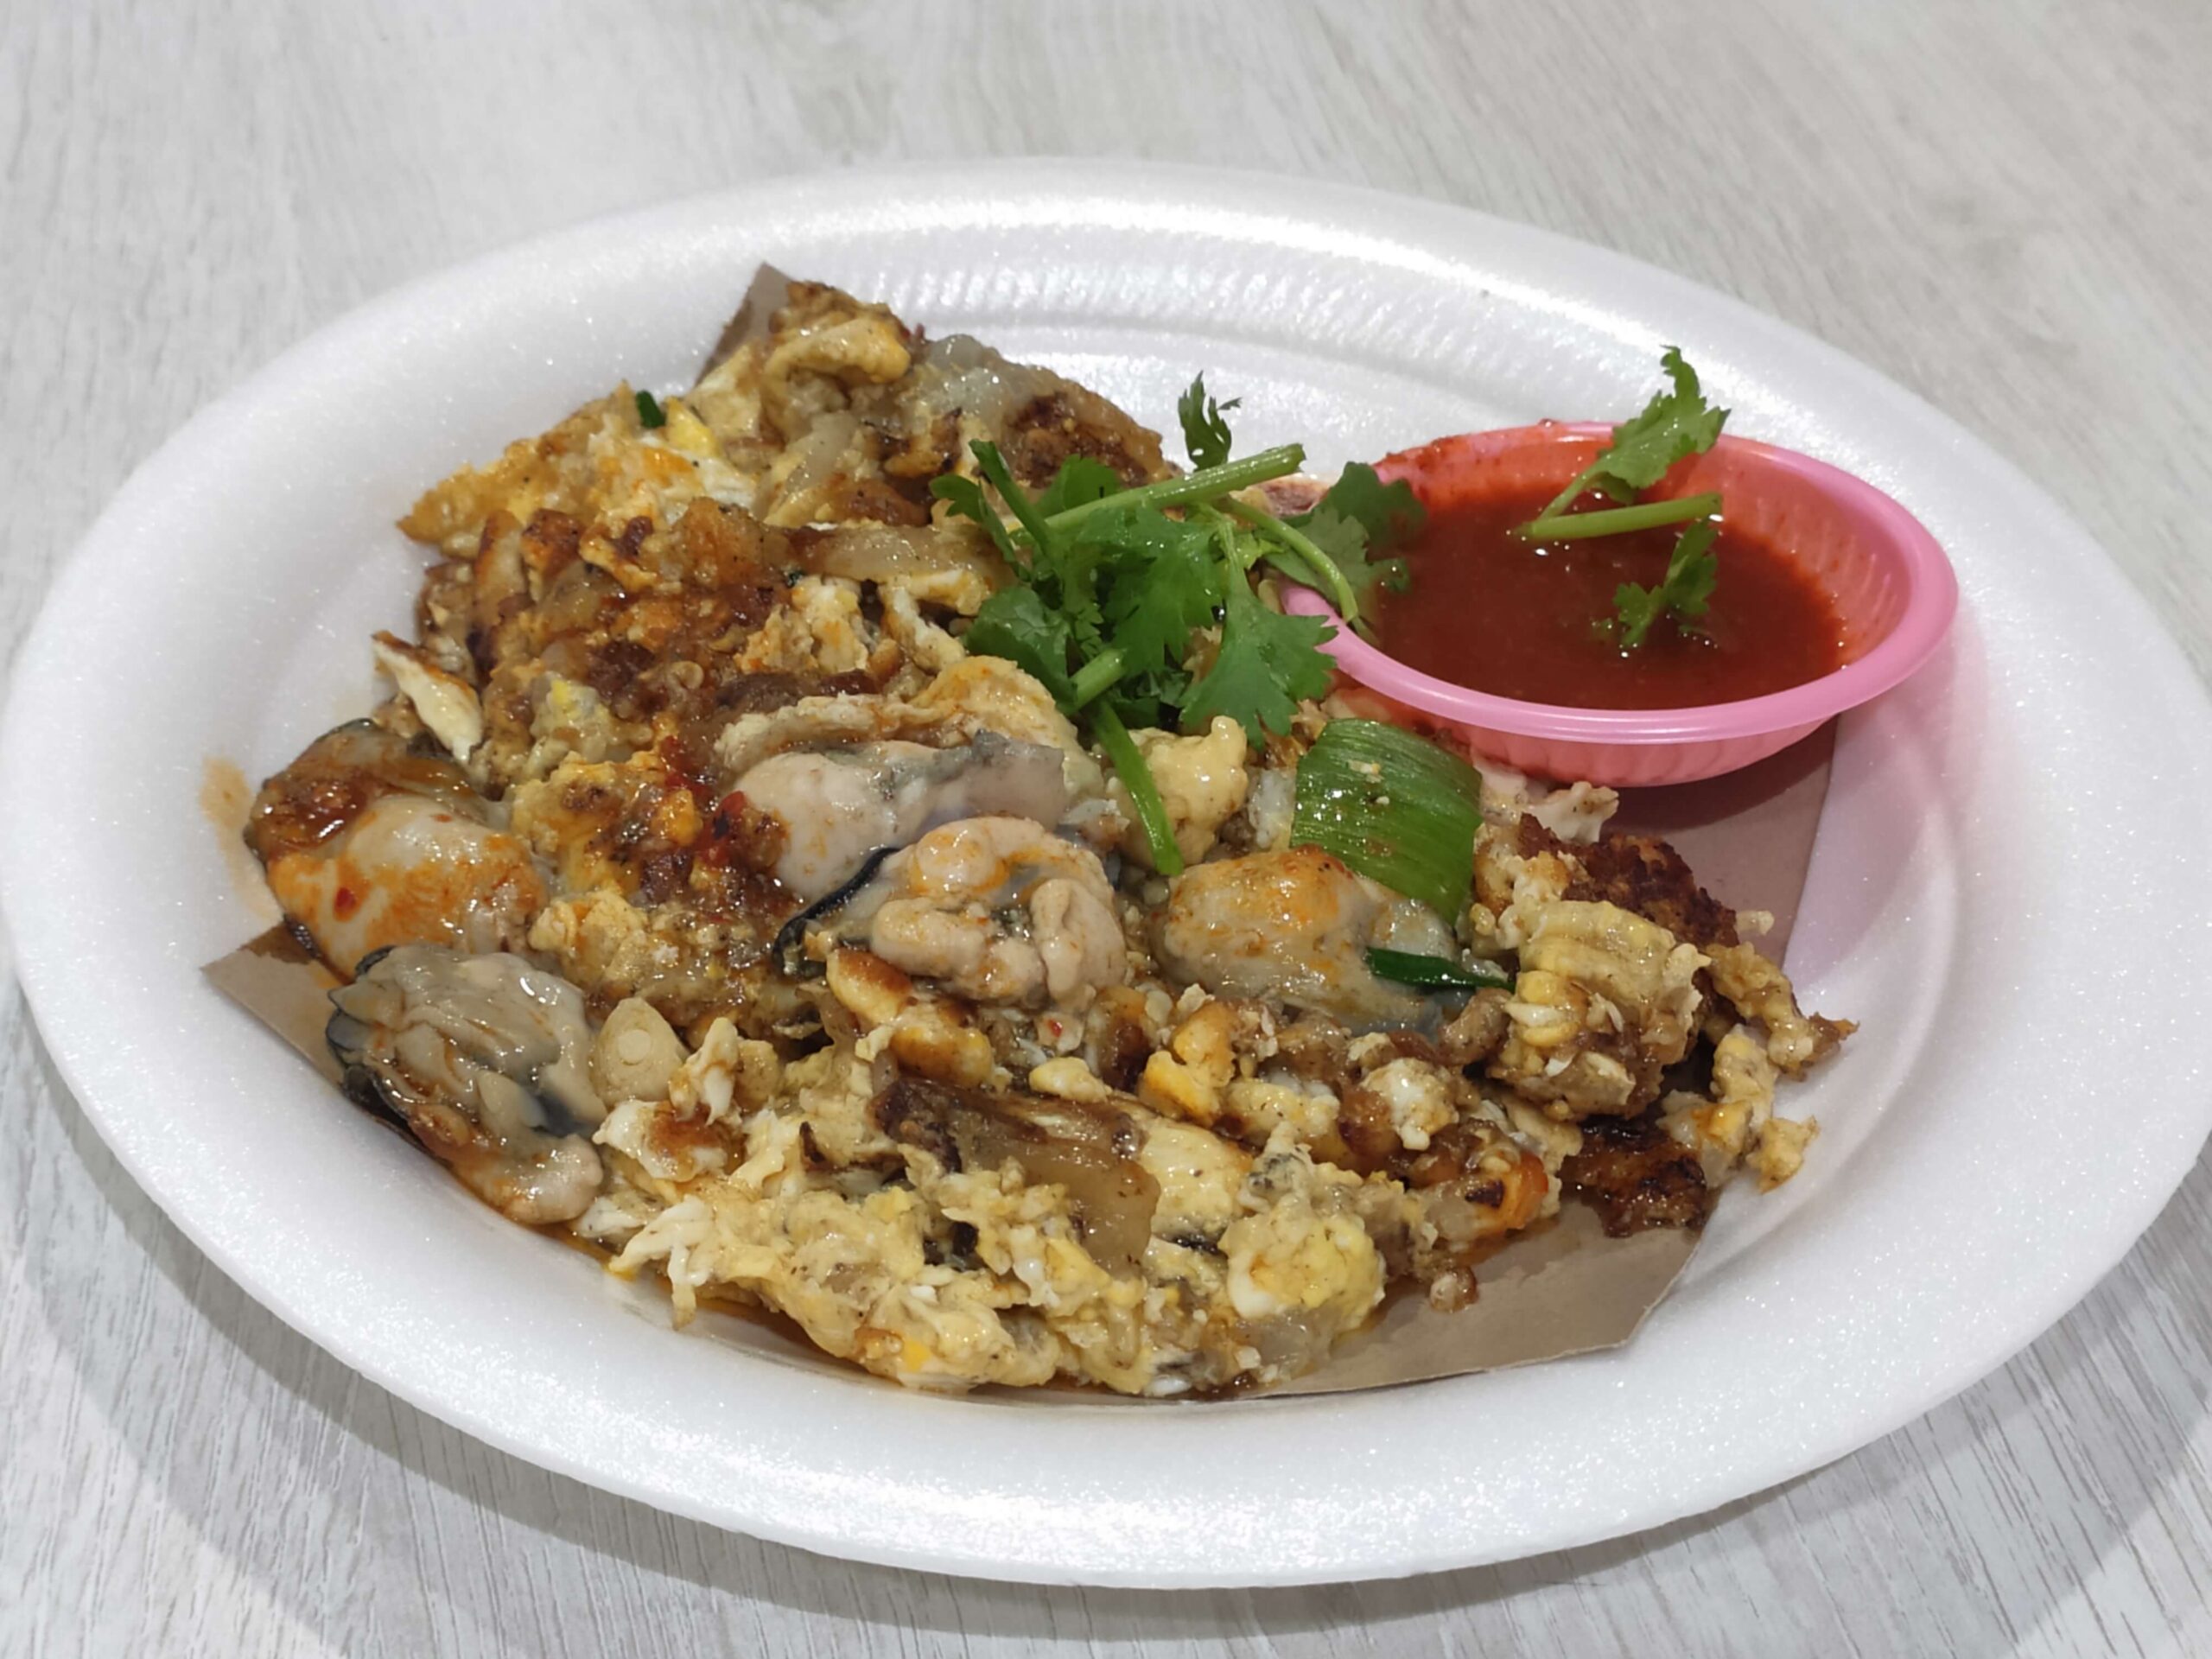 Lim’s Fried Oyster: Fried Oyster Omelette